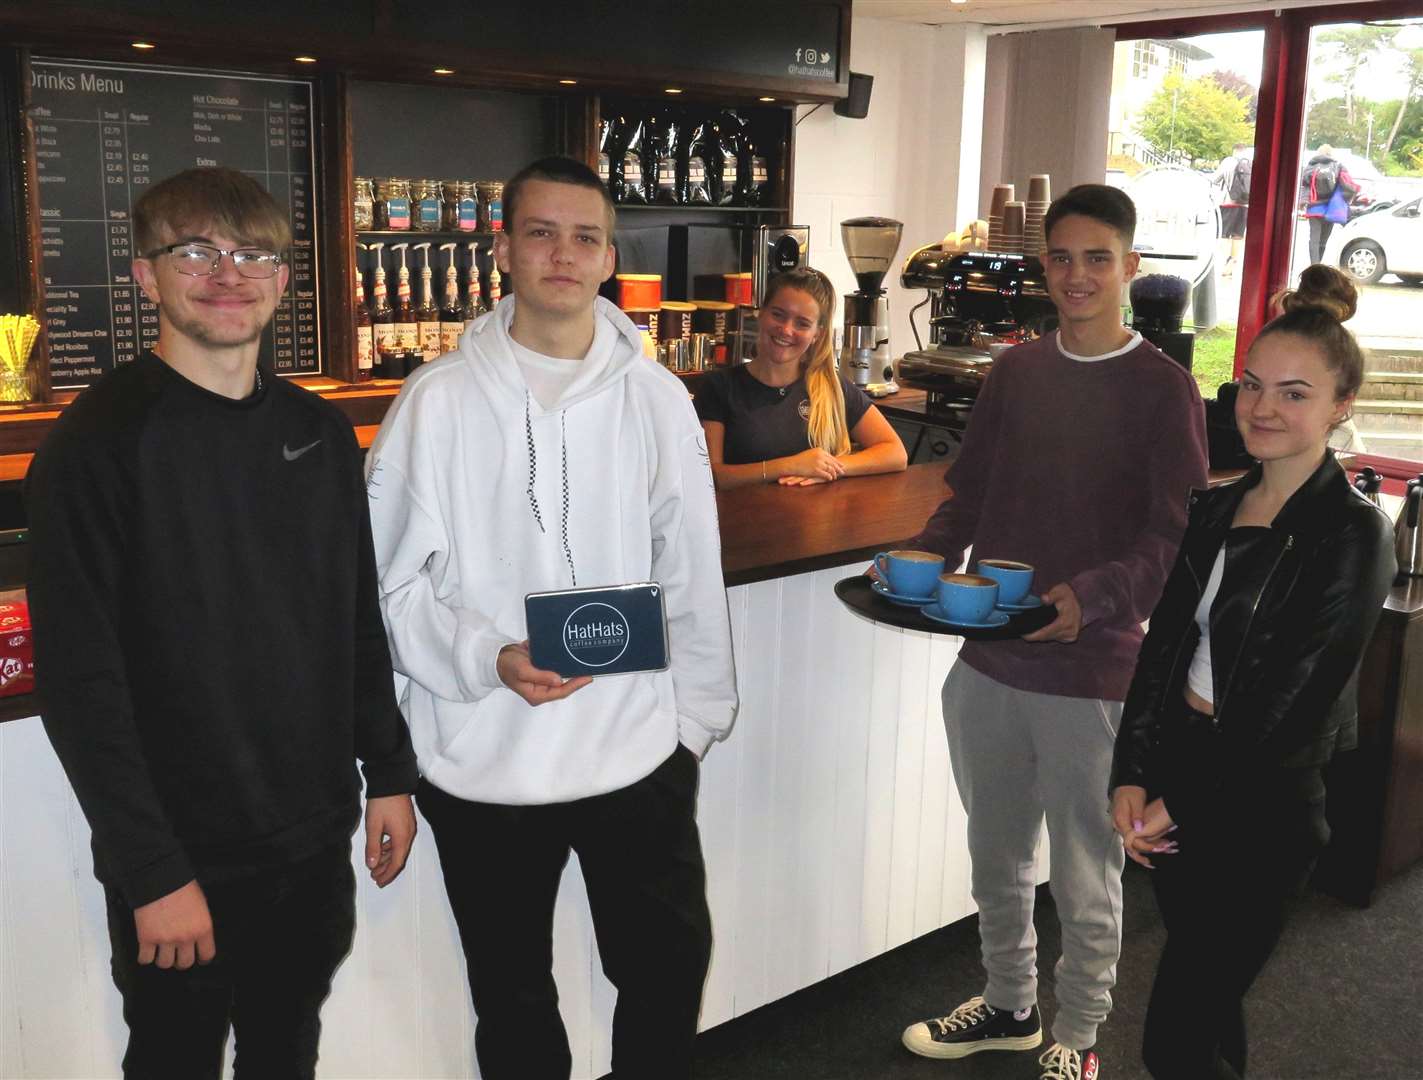 Btec entrepreneur students (left to right) Luke Squire, Joe Wilson, Kieran Purkiss and Katie Bevan with HatsHats manager Charlotte Thomson (19362140) (19370052)